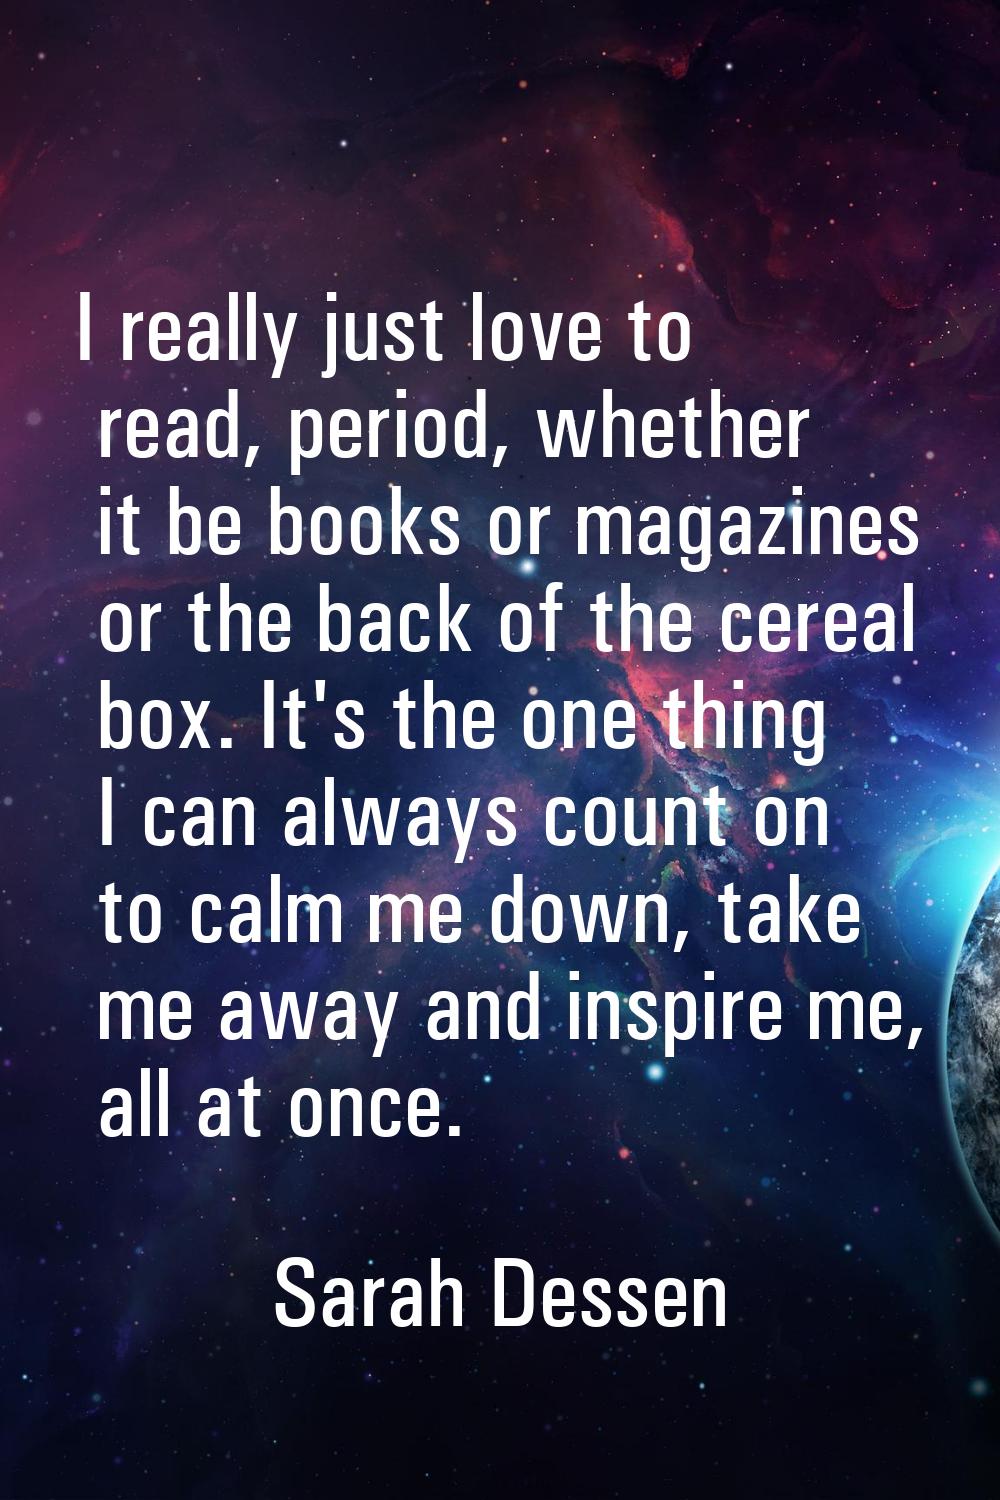 I really just love to read, period, whether it be books or magazines or the back of the cereal box.